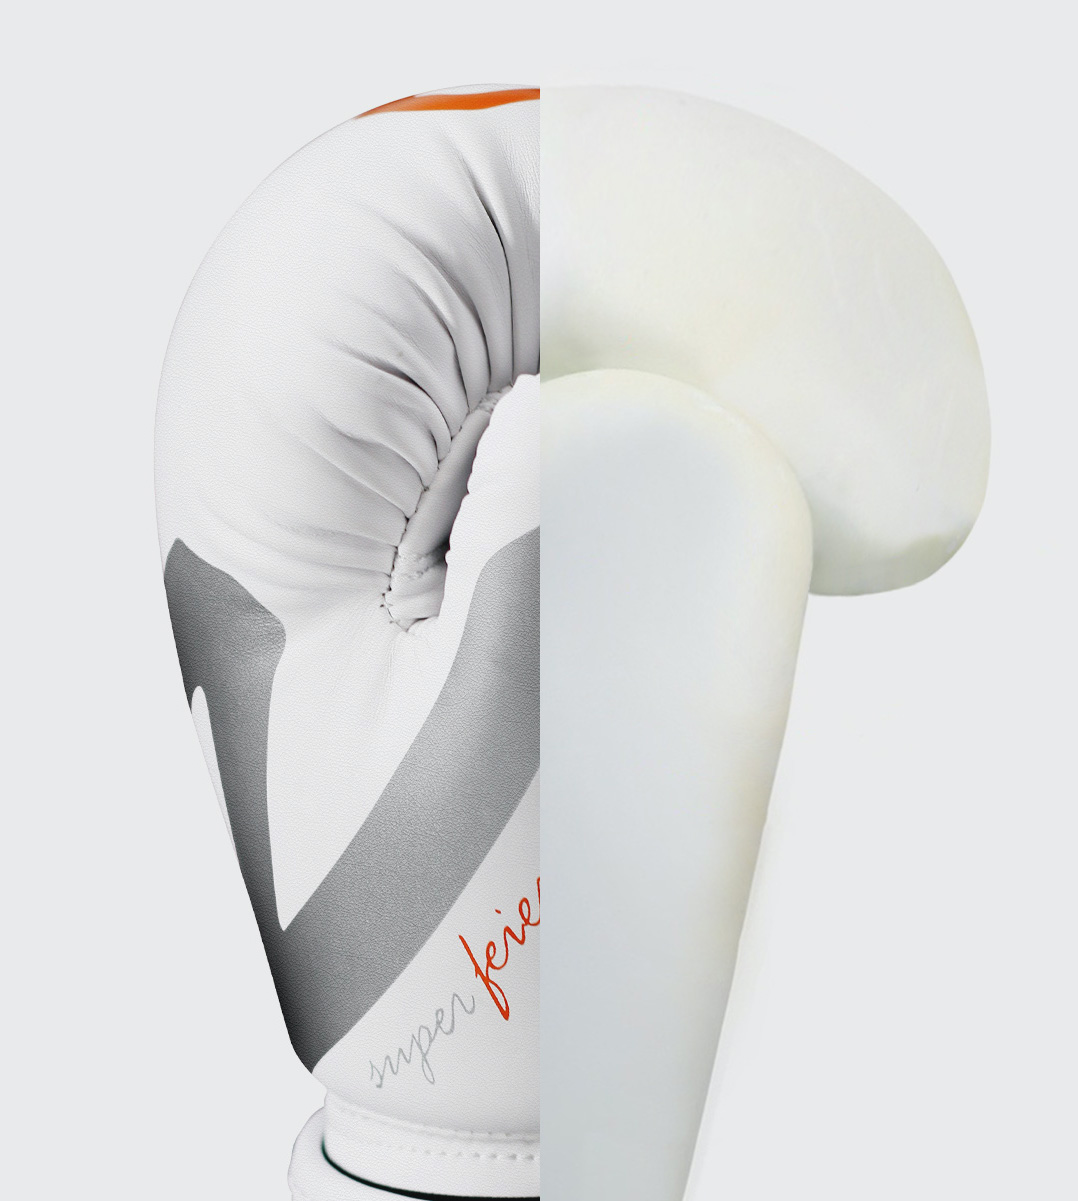 Xiaomi FED Training Boxing Gloves